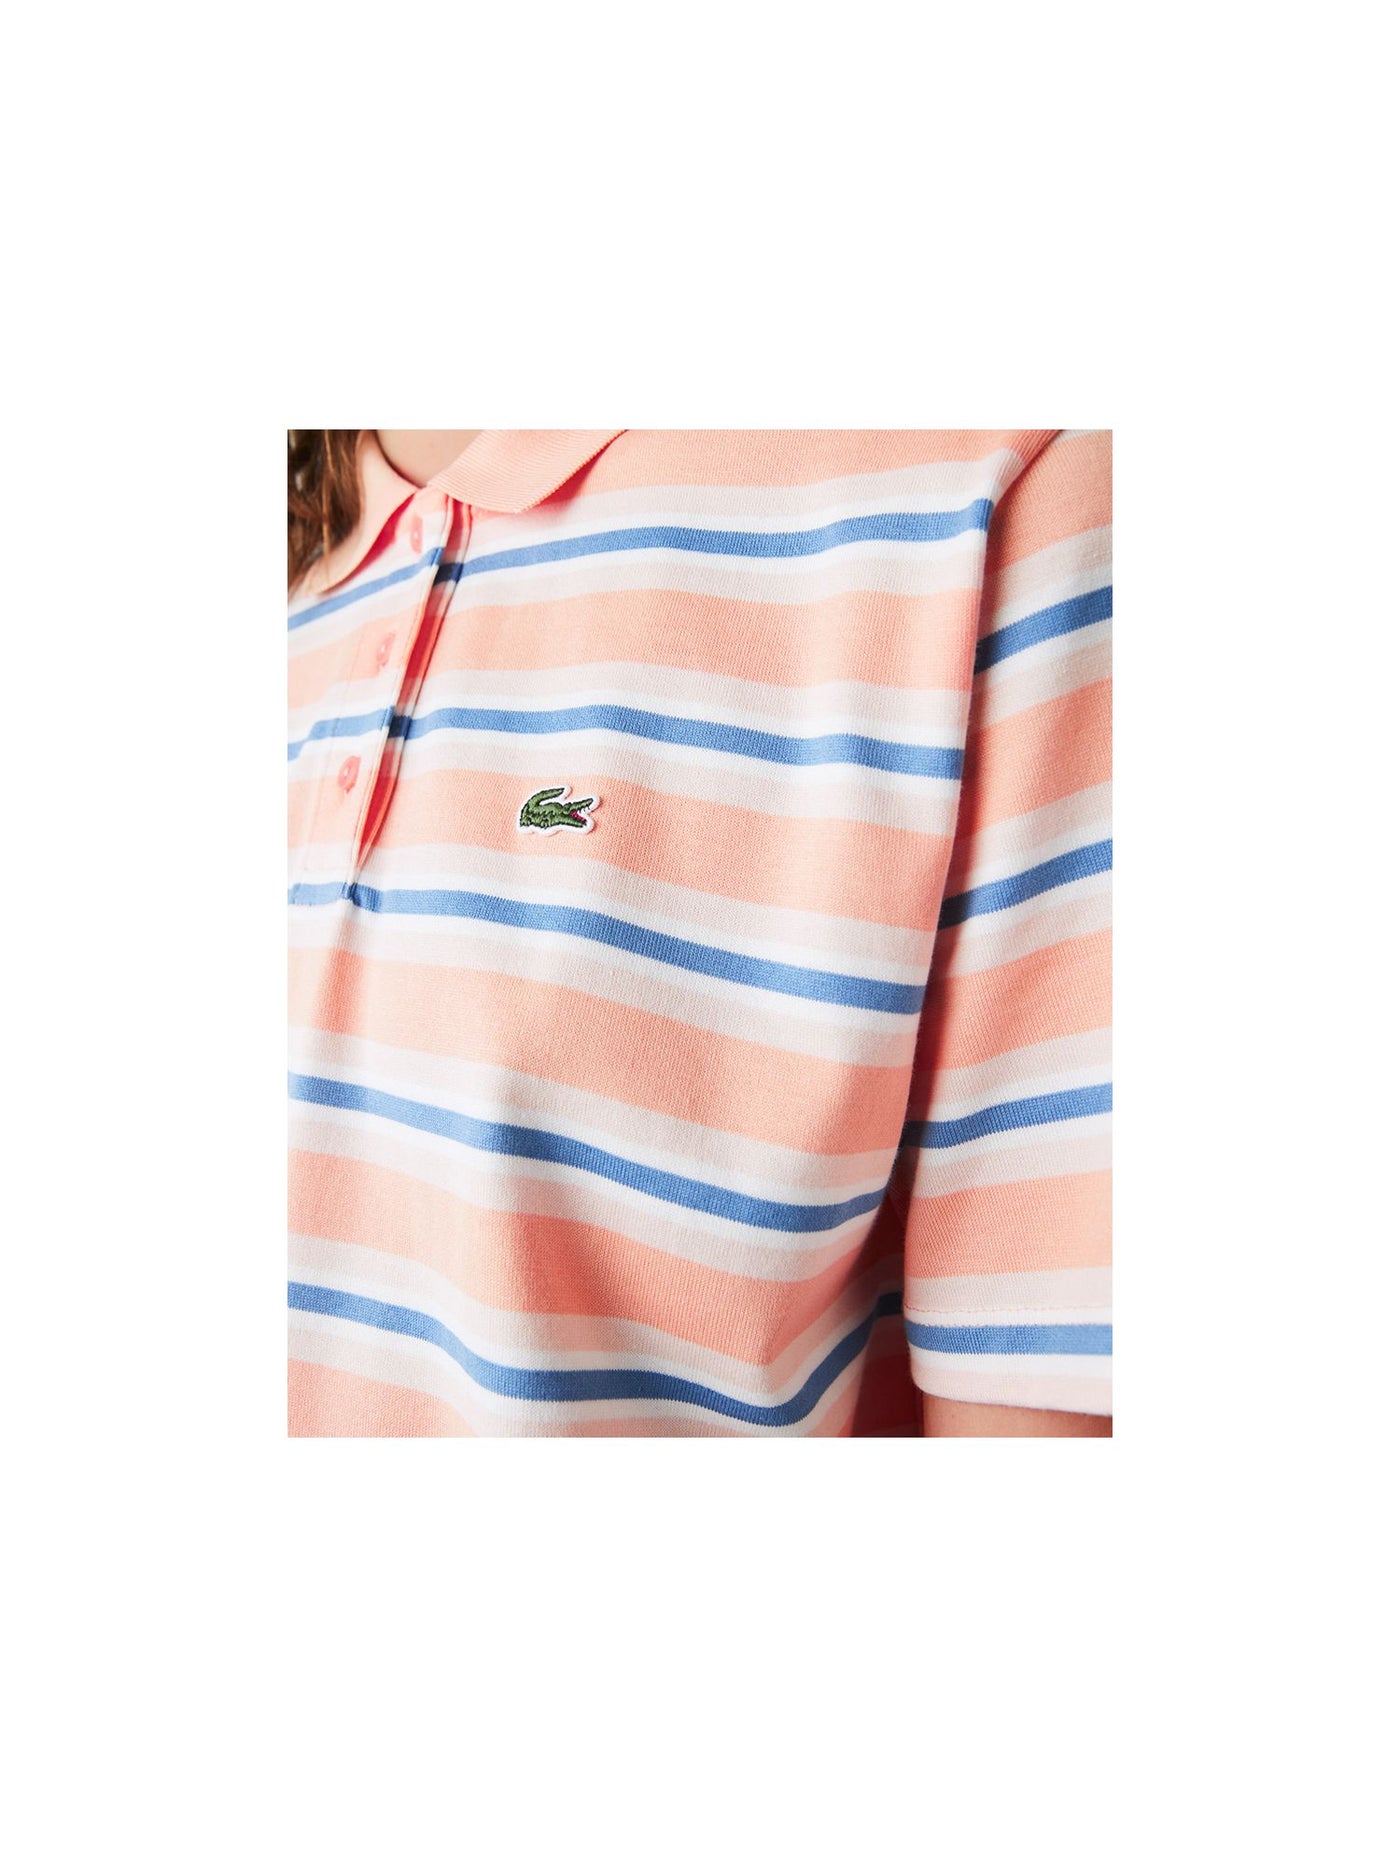 LACOSTE Womens Orange Striped Short Sleeve Collared Top 40